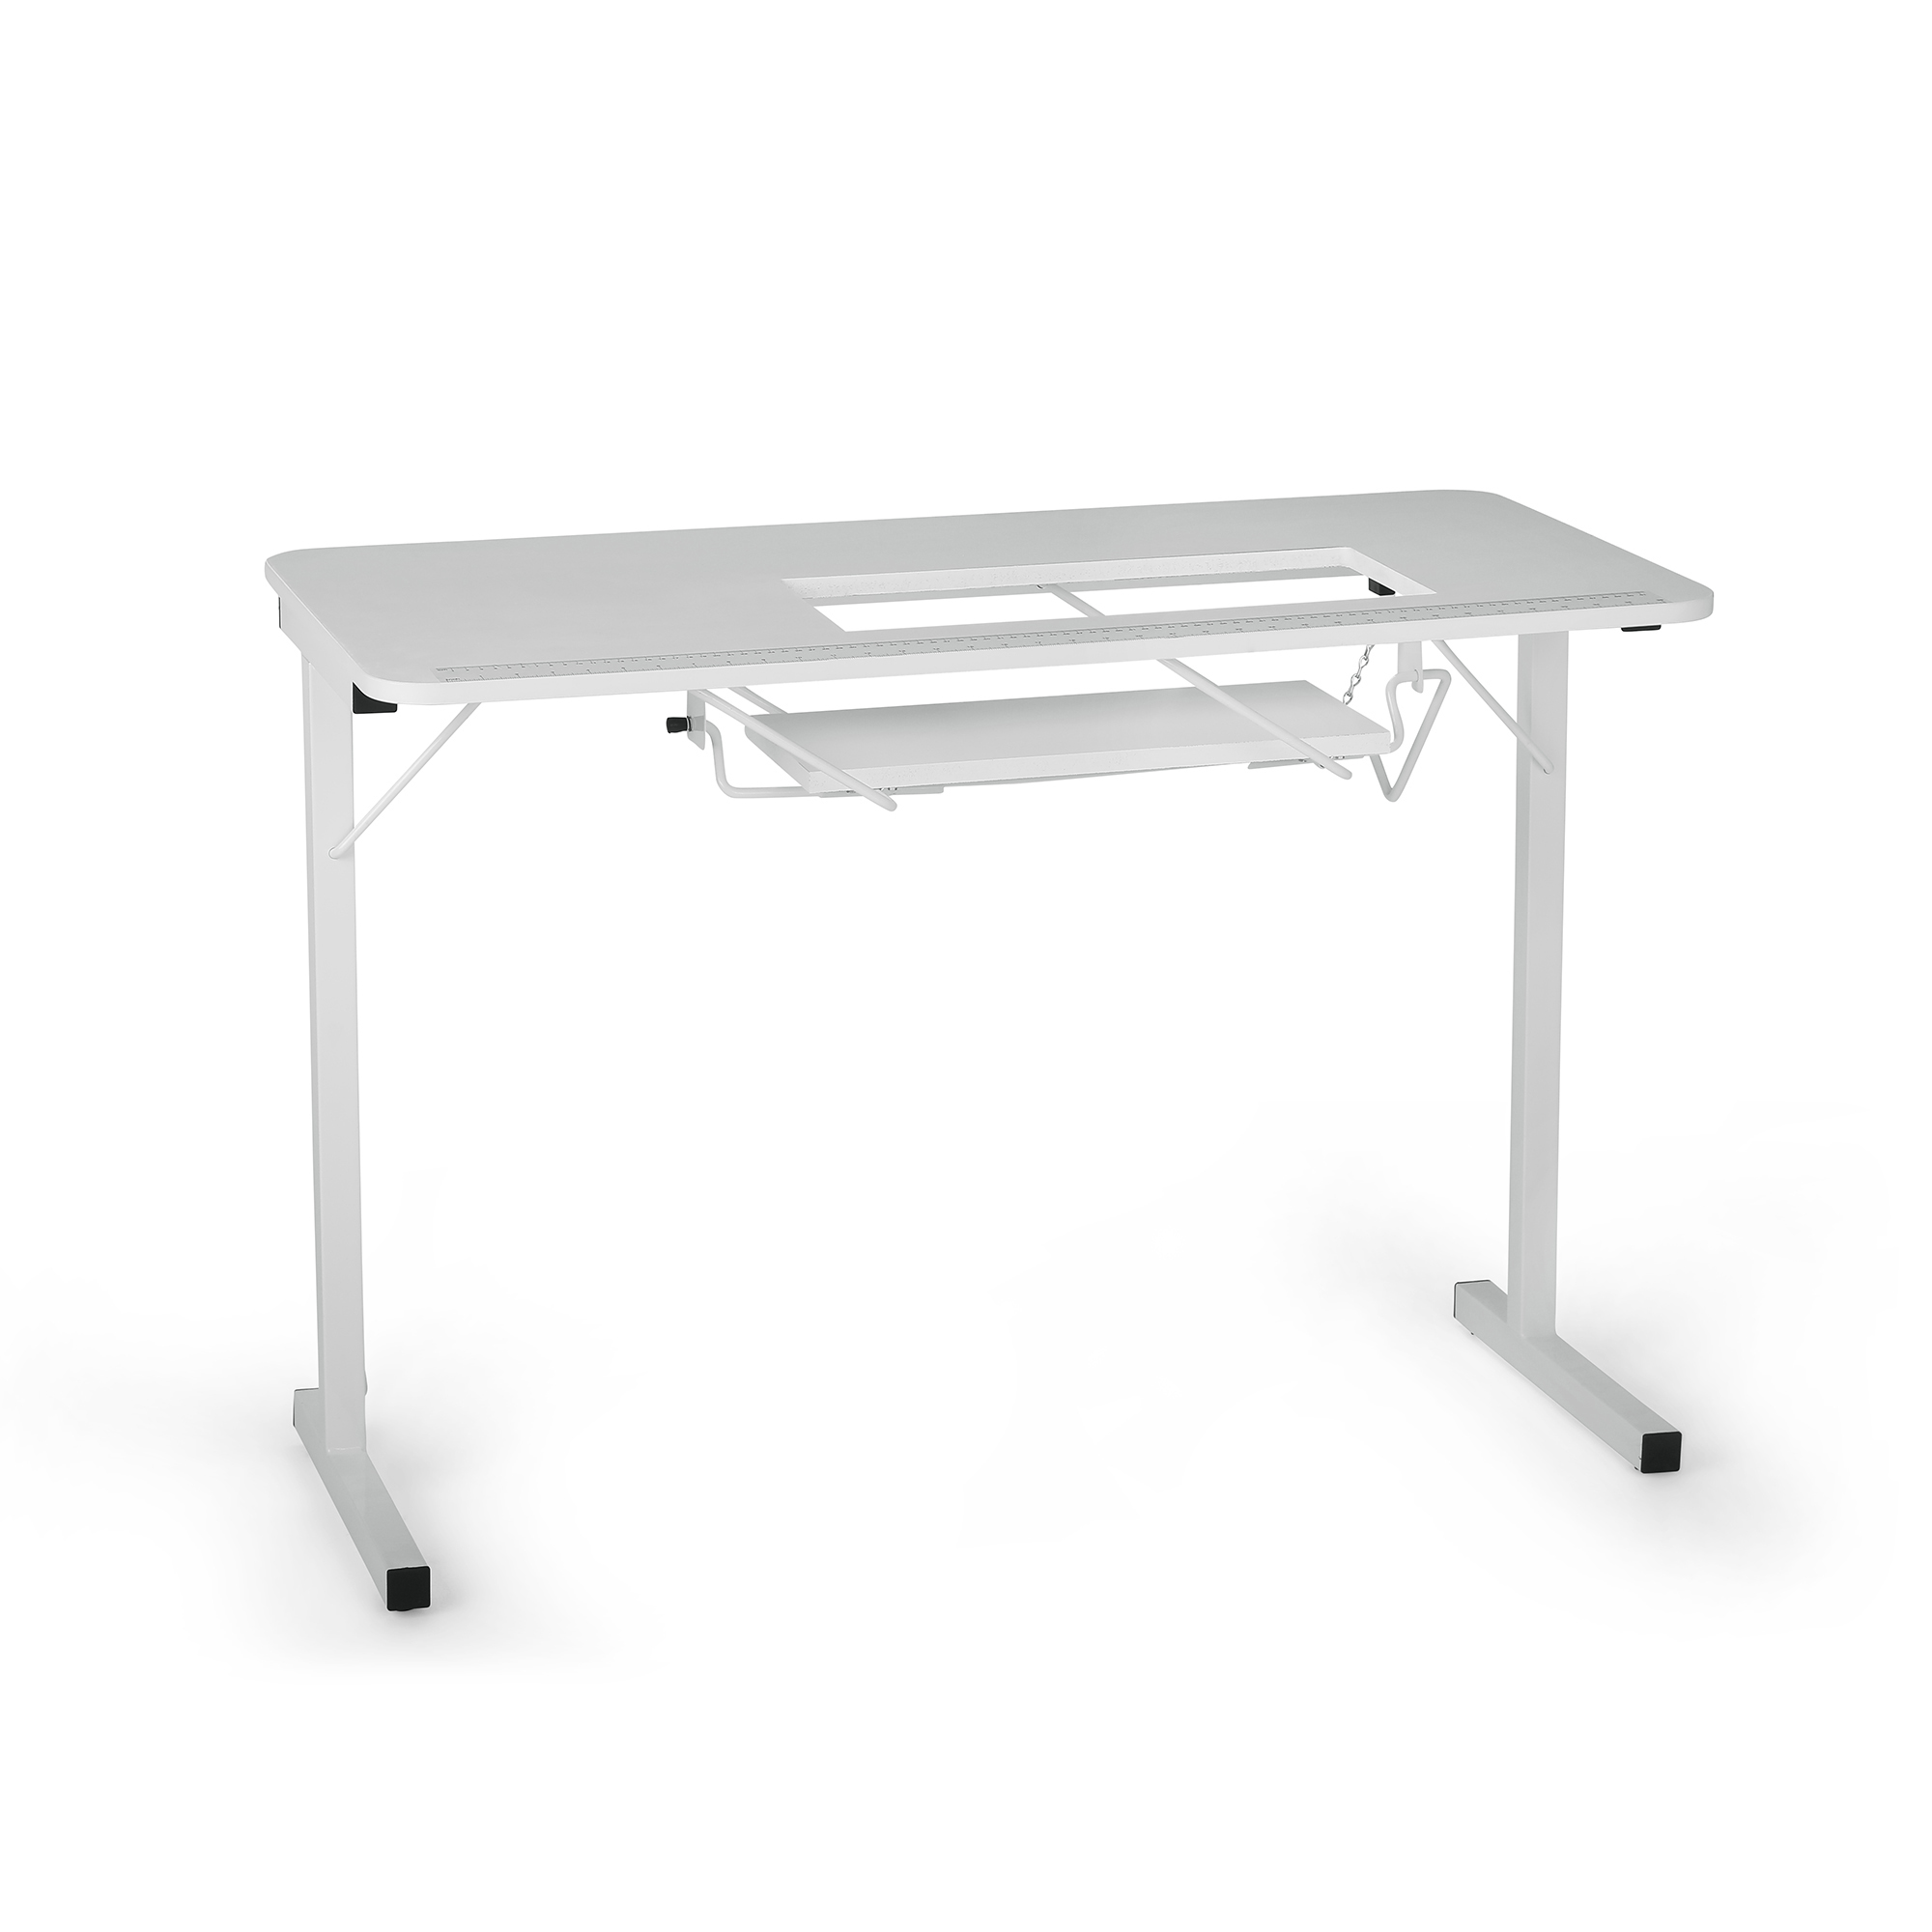 Image of: Fully Assembled Craft and Hobby Table White 71.5 x 101.5 x 50.5cm | Arrow 98601